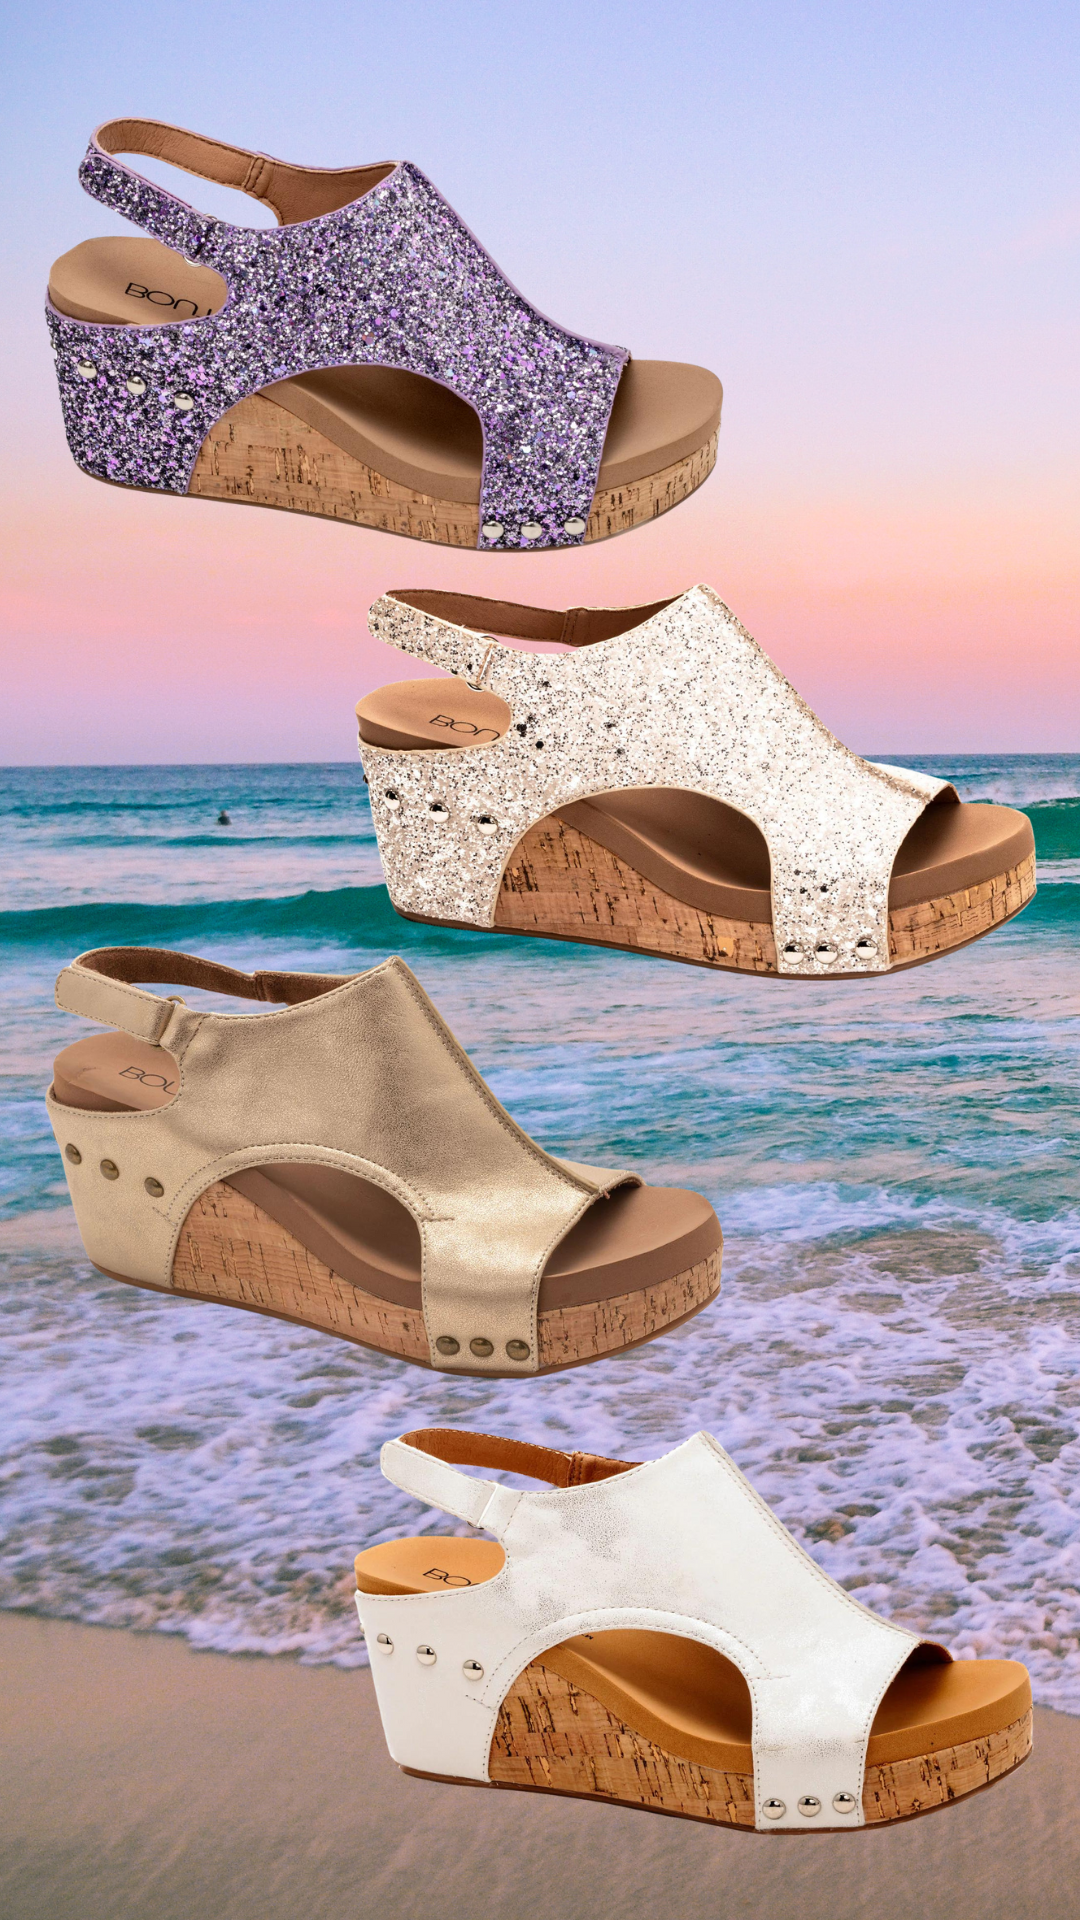 Market Live Preorder: Carley Wedge by Corky’s (Ships in 2-3 Weeks)